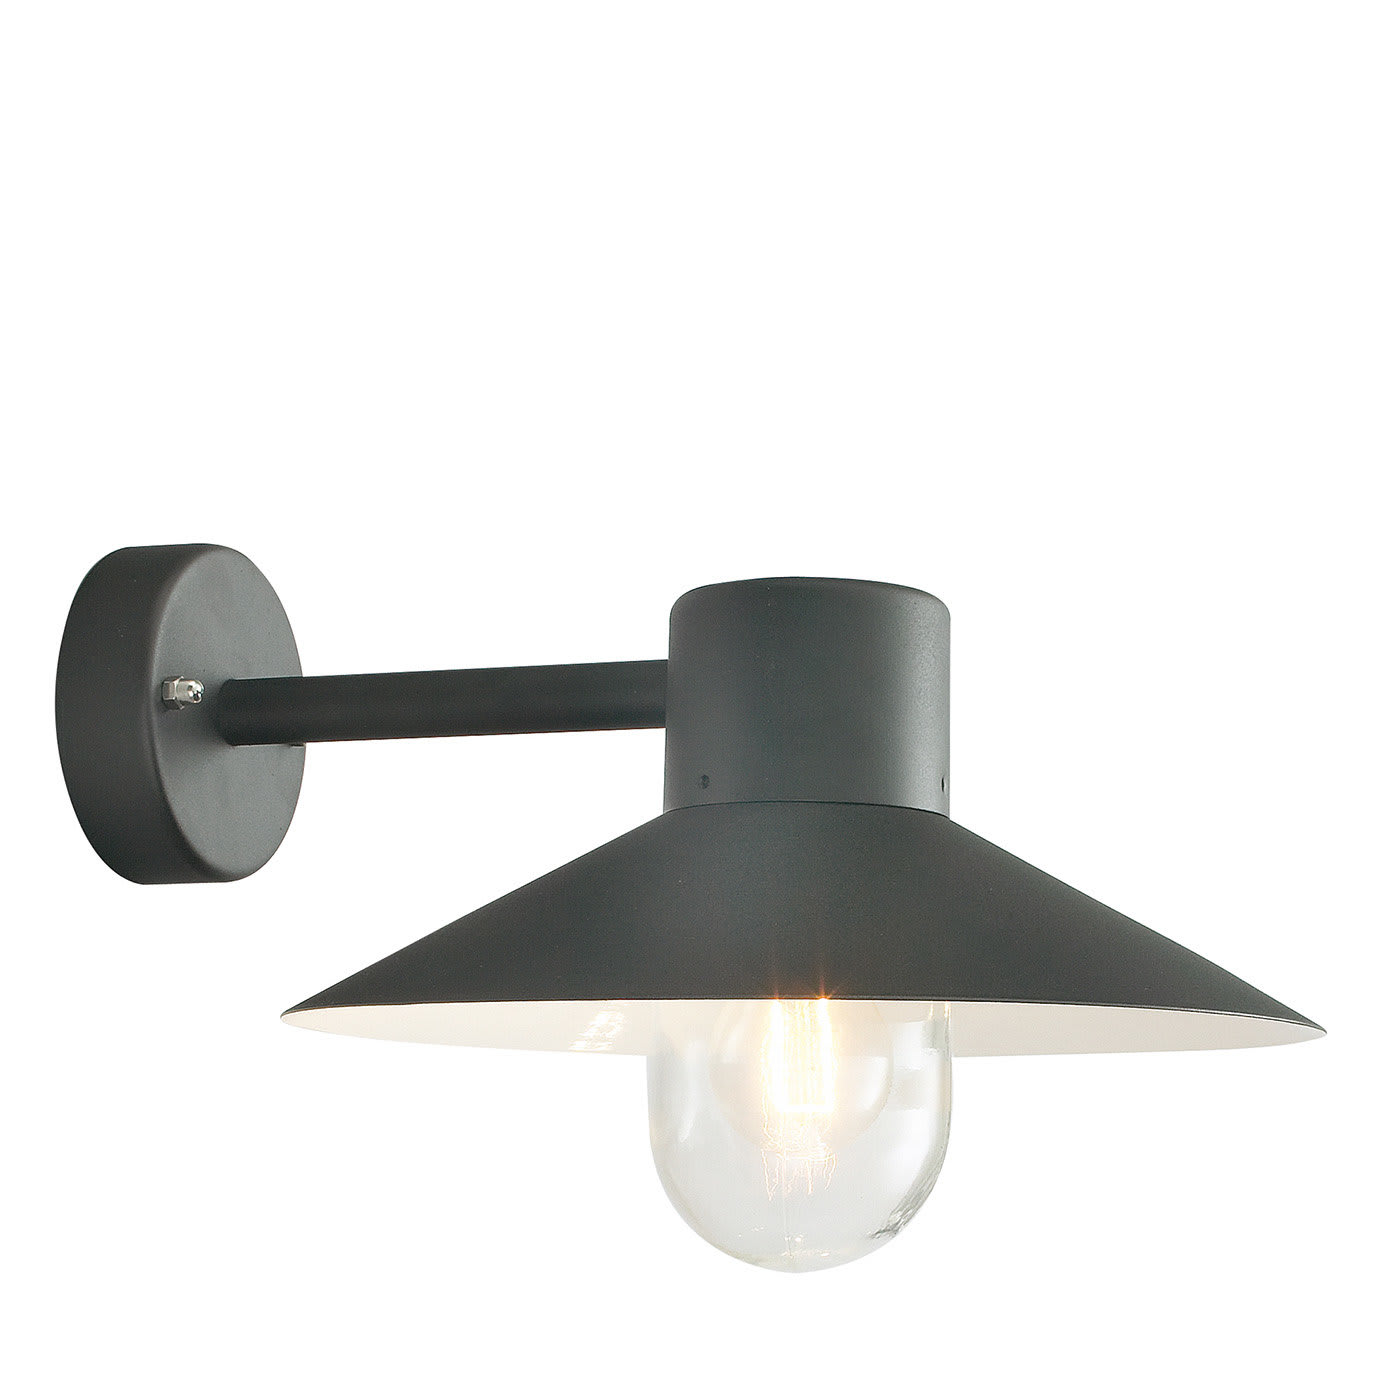 Lund Black Wall Lamp - Norlys